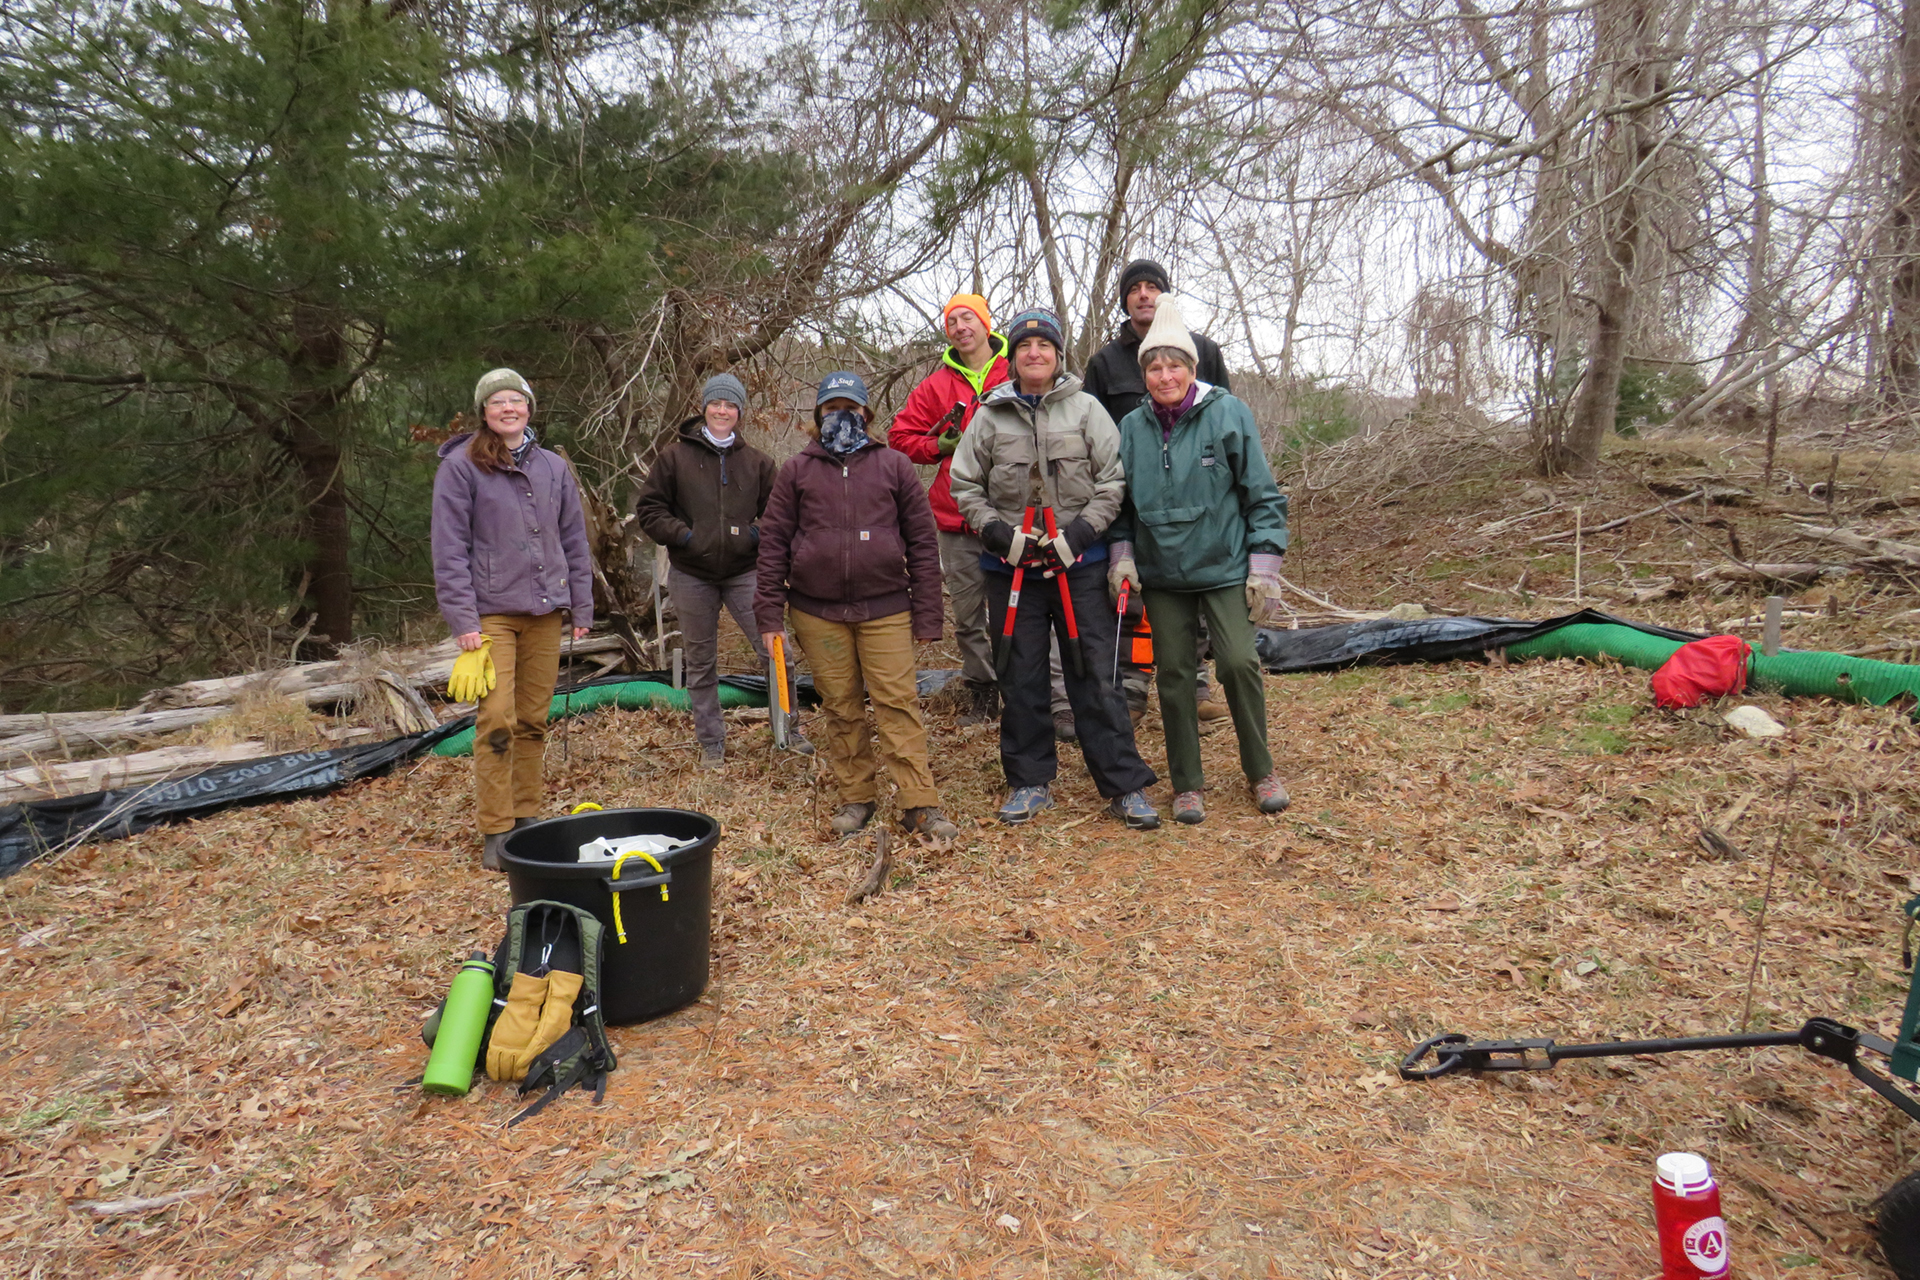 Volunteers posed for a group photo with their equipment